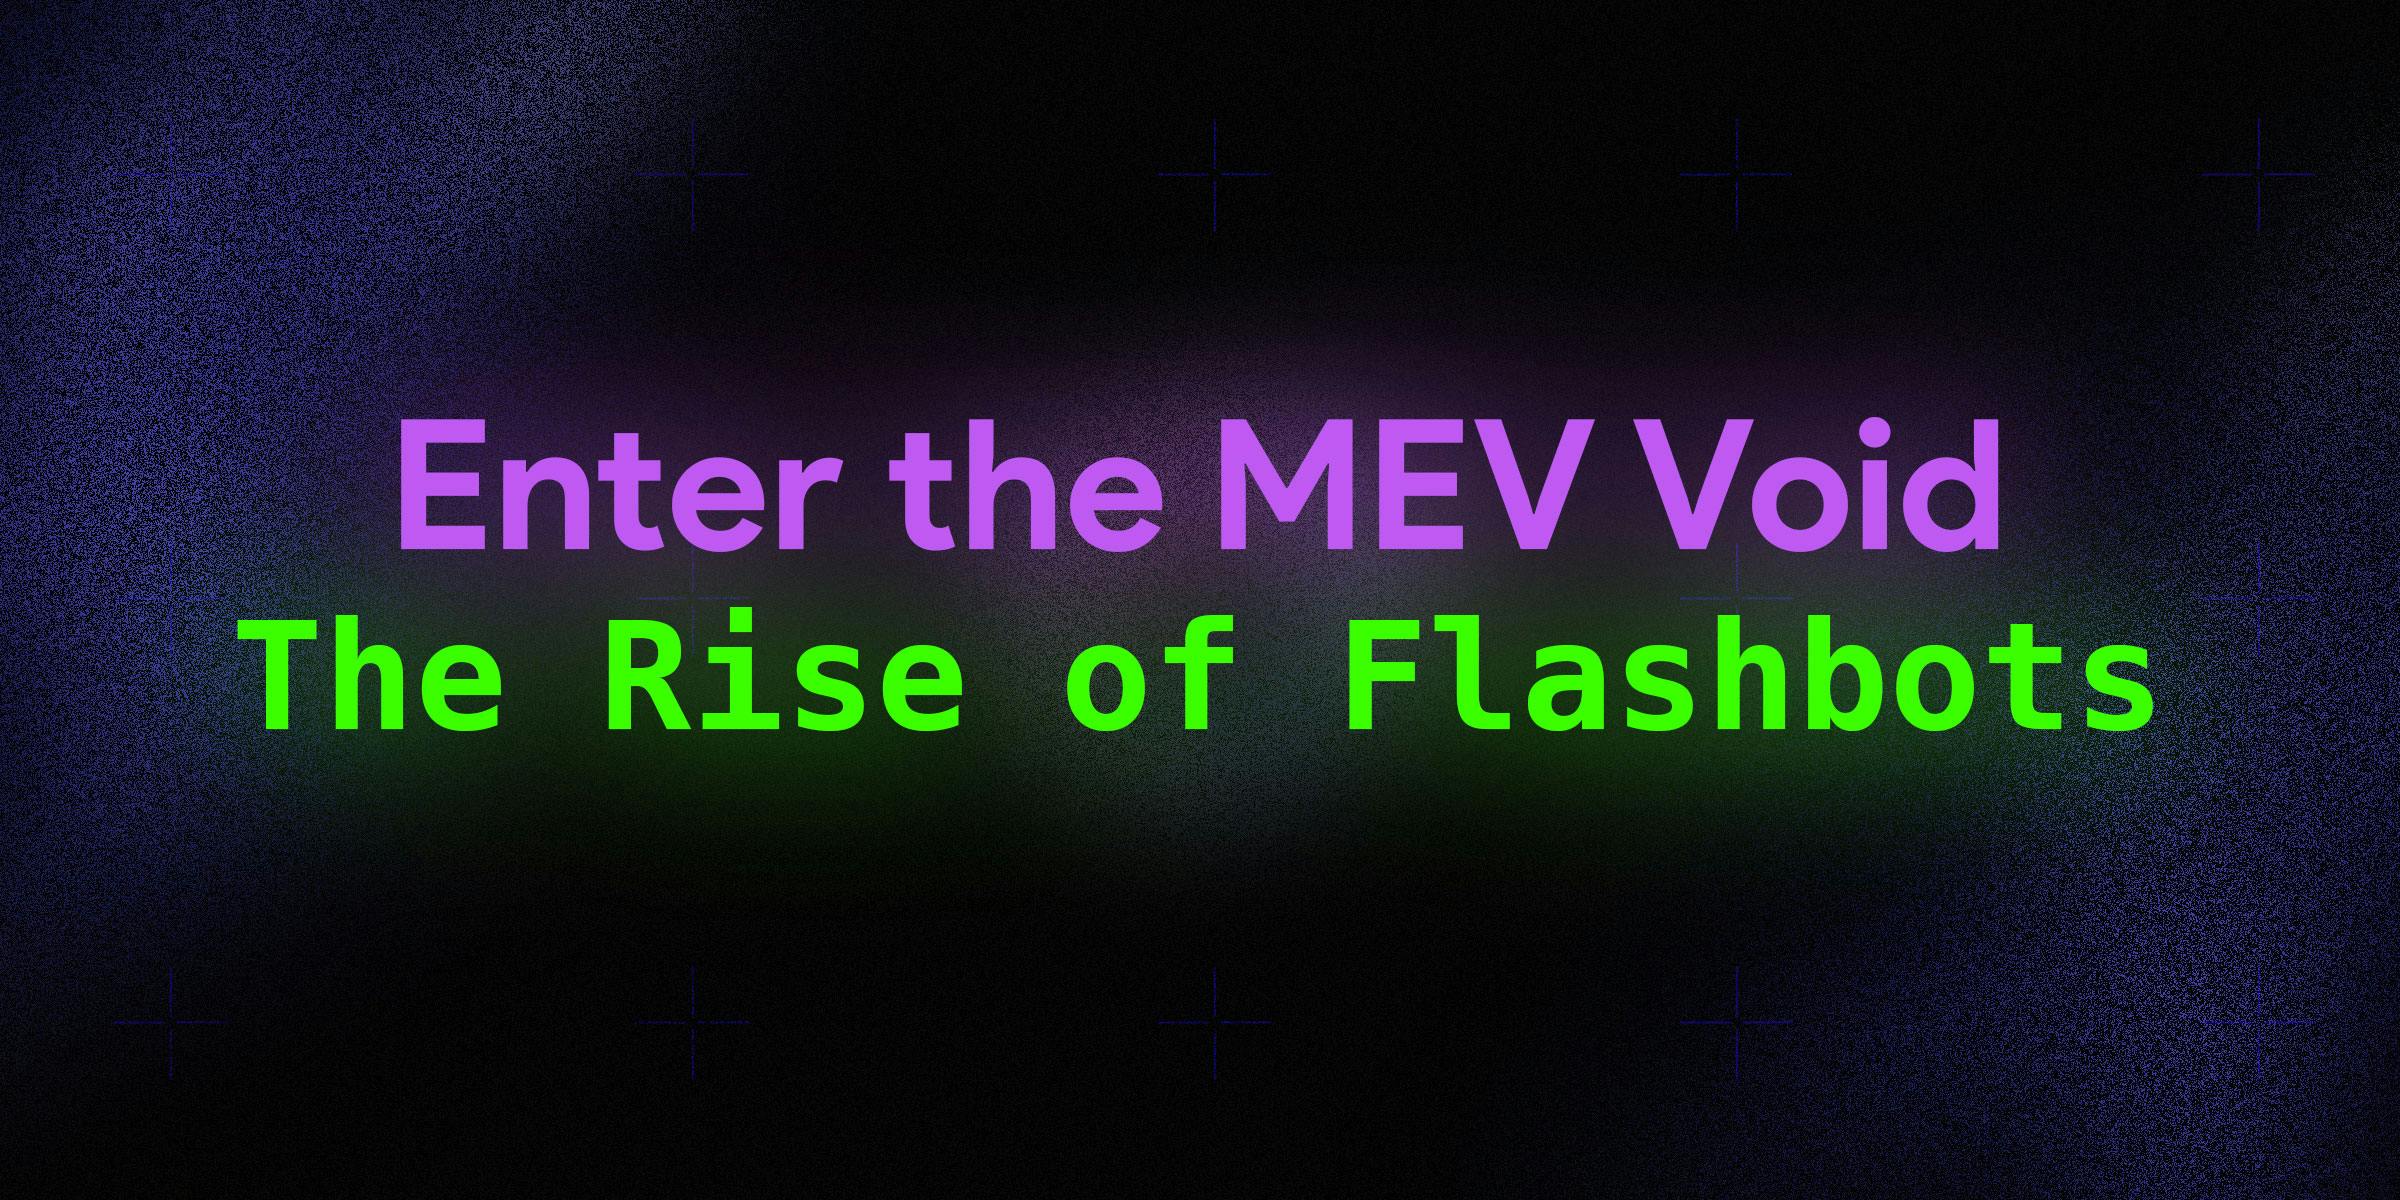 Thumbnail of Enter the MEV Void: the Rise of Flashbots